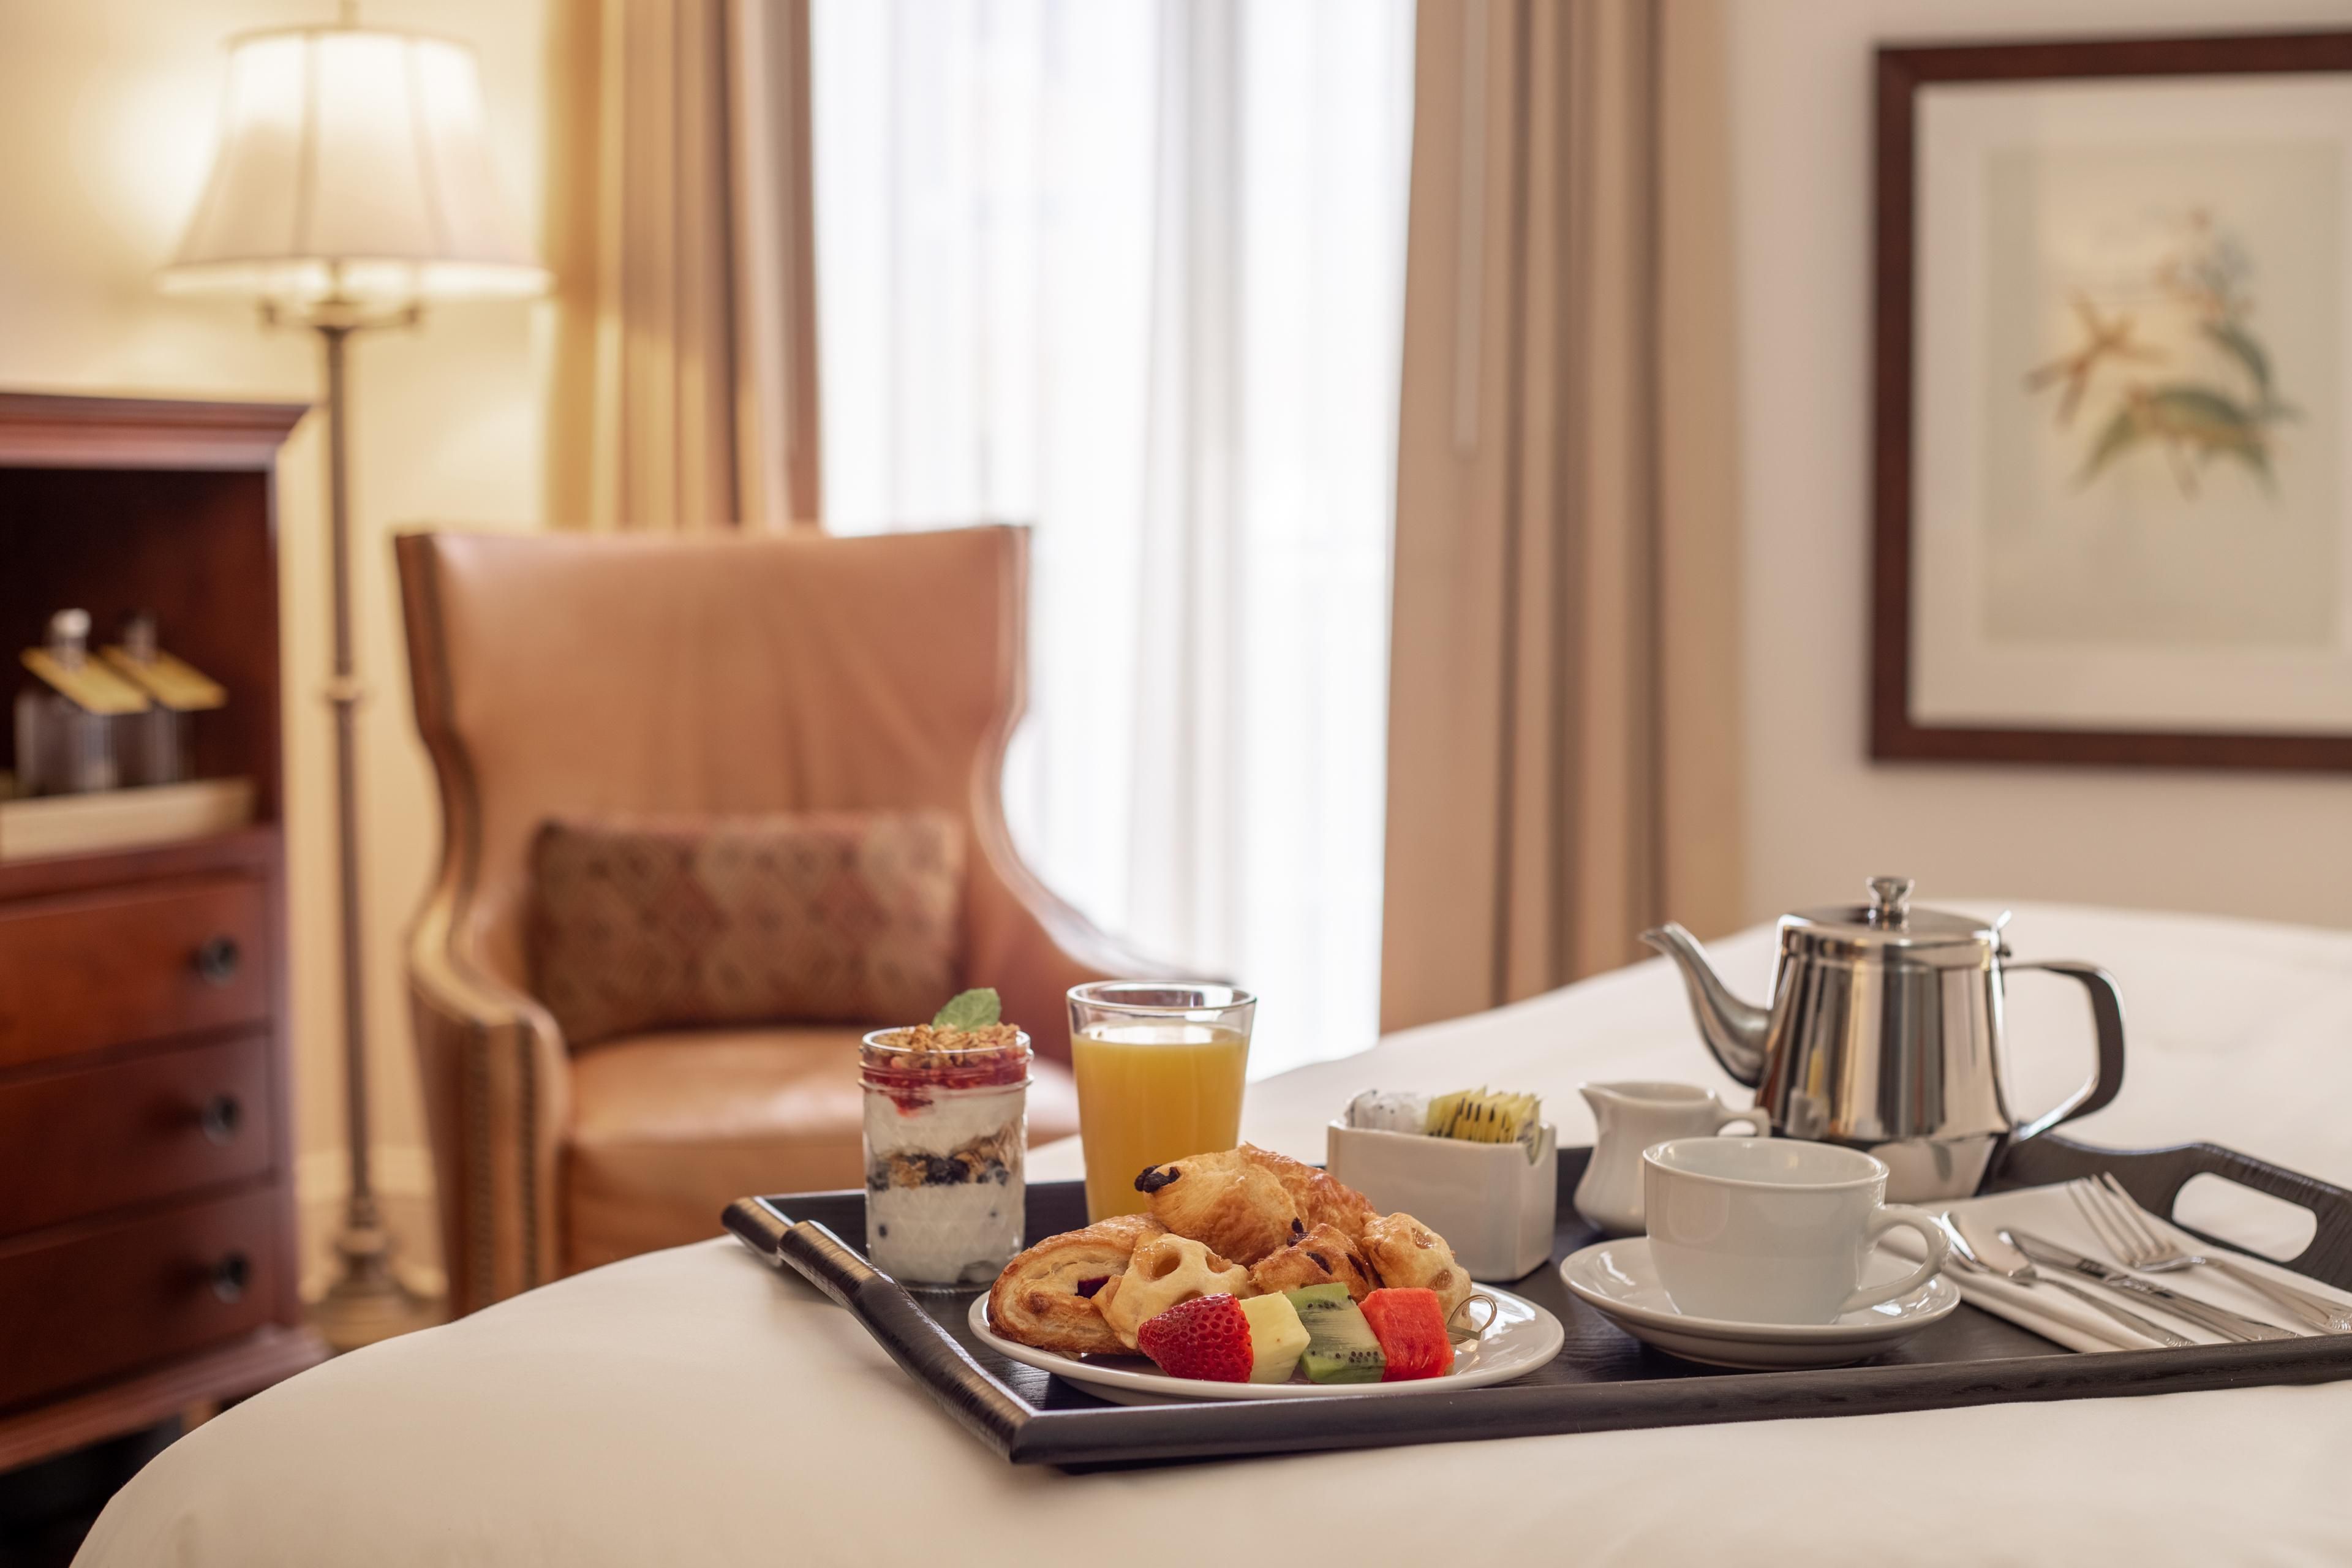 Wake up to room service, with fresh pastries & hot coffee.